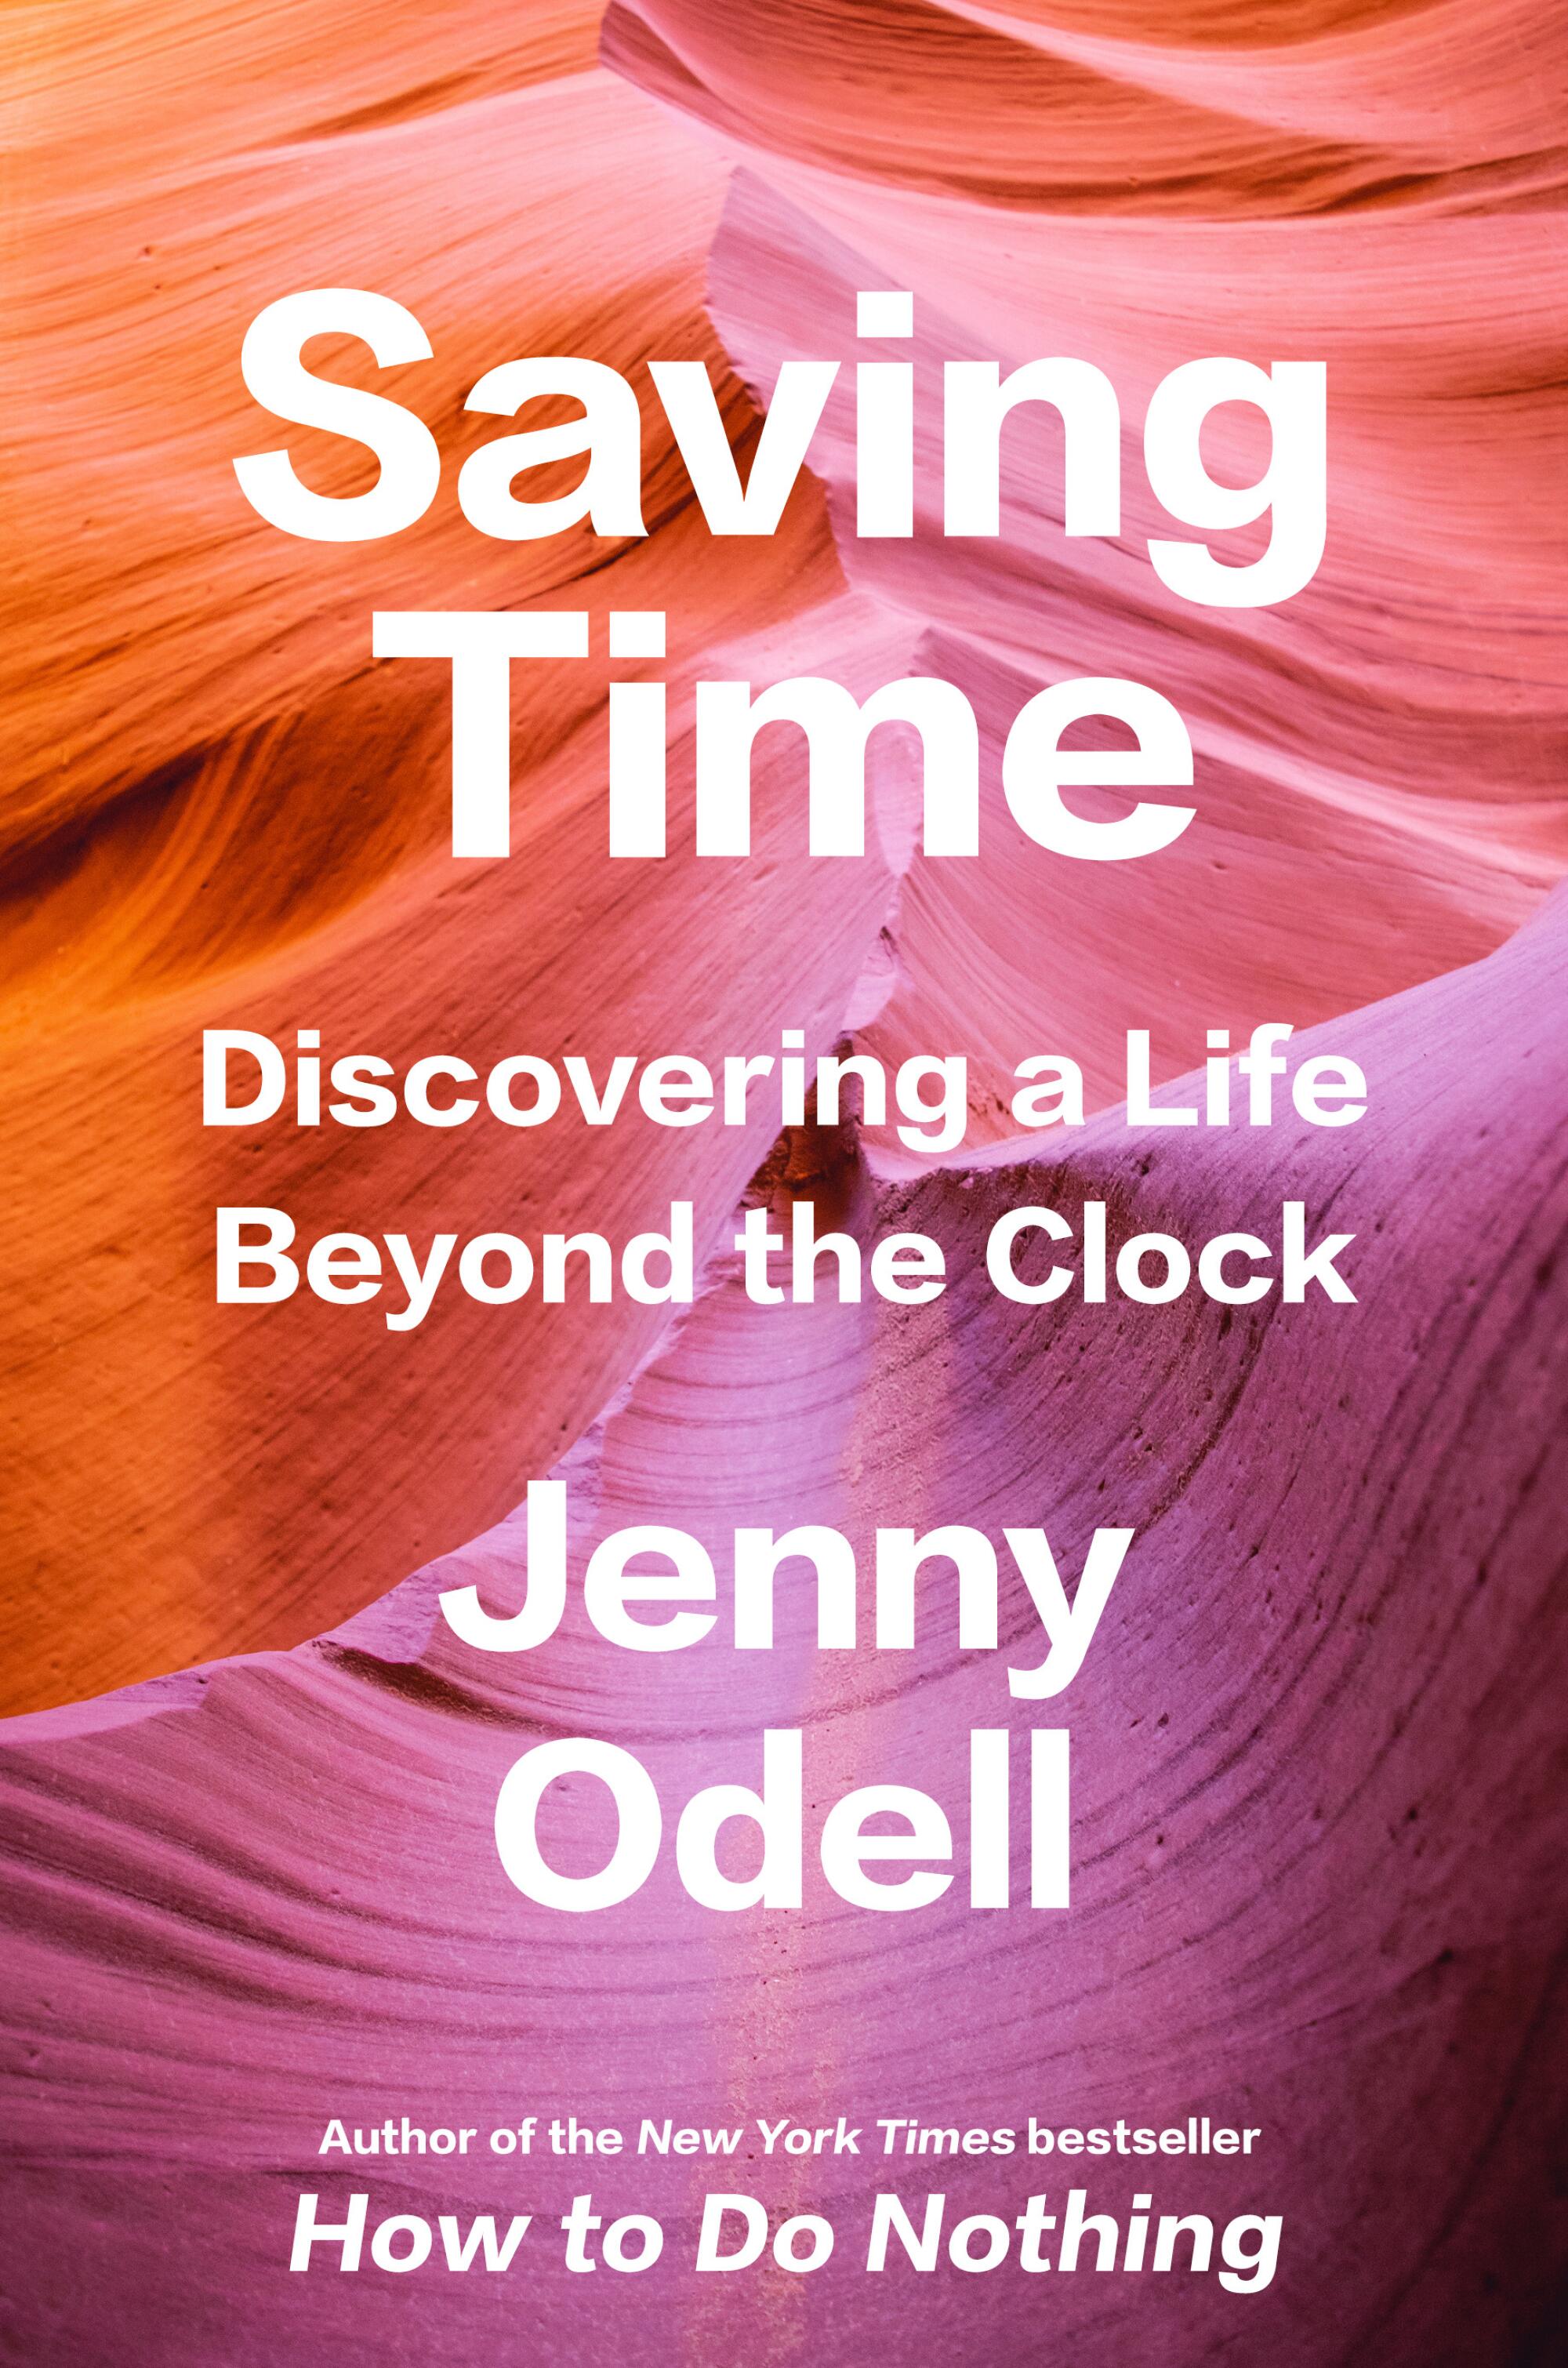 Book cover of "Saving Time" by Jenny Odell